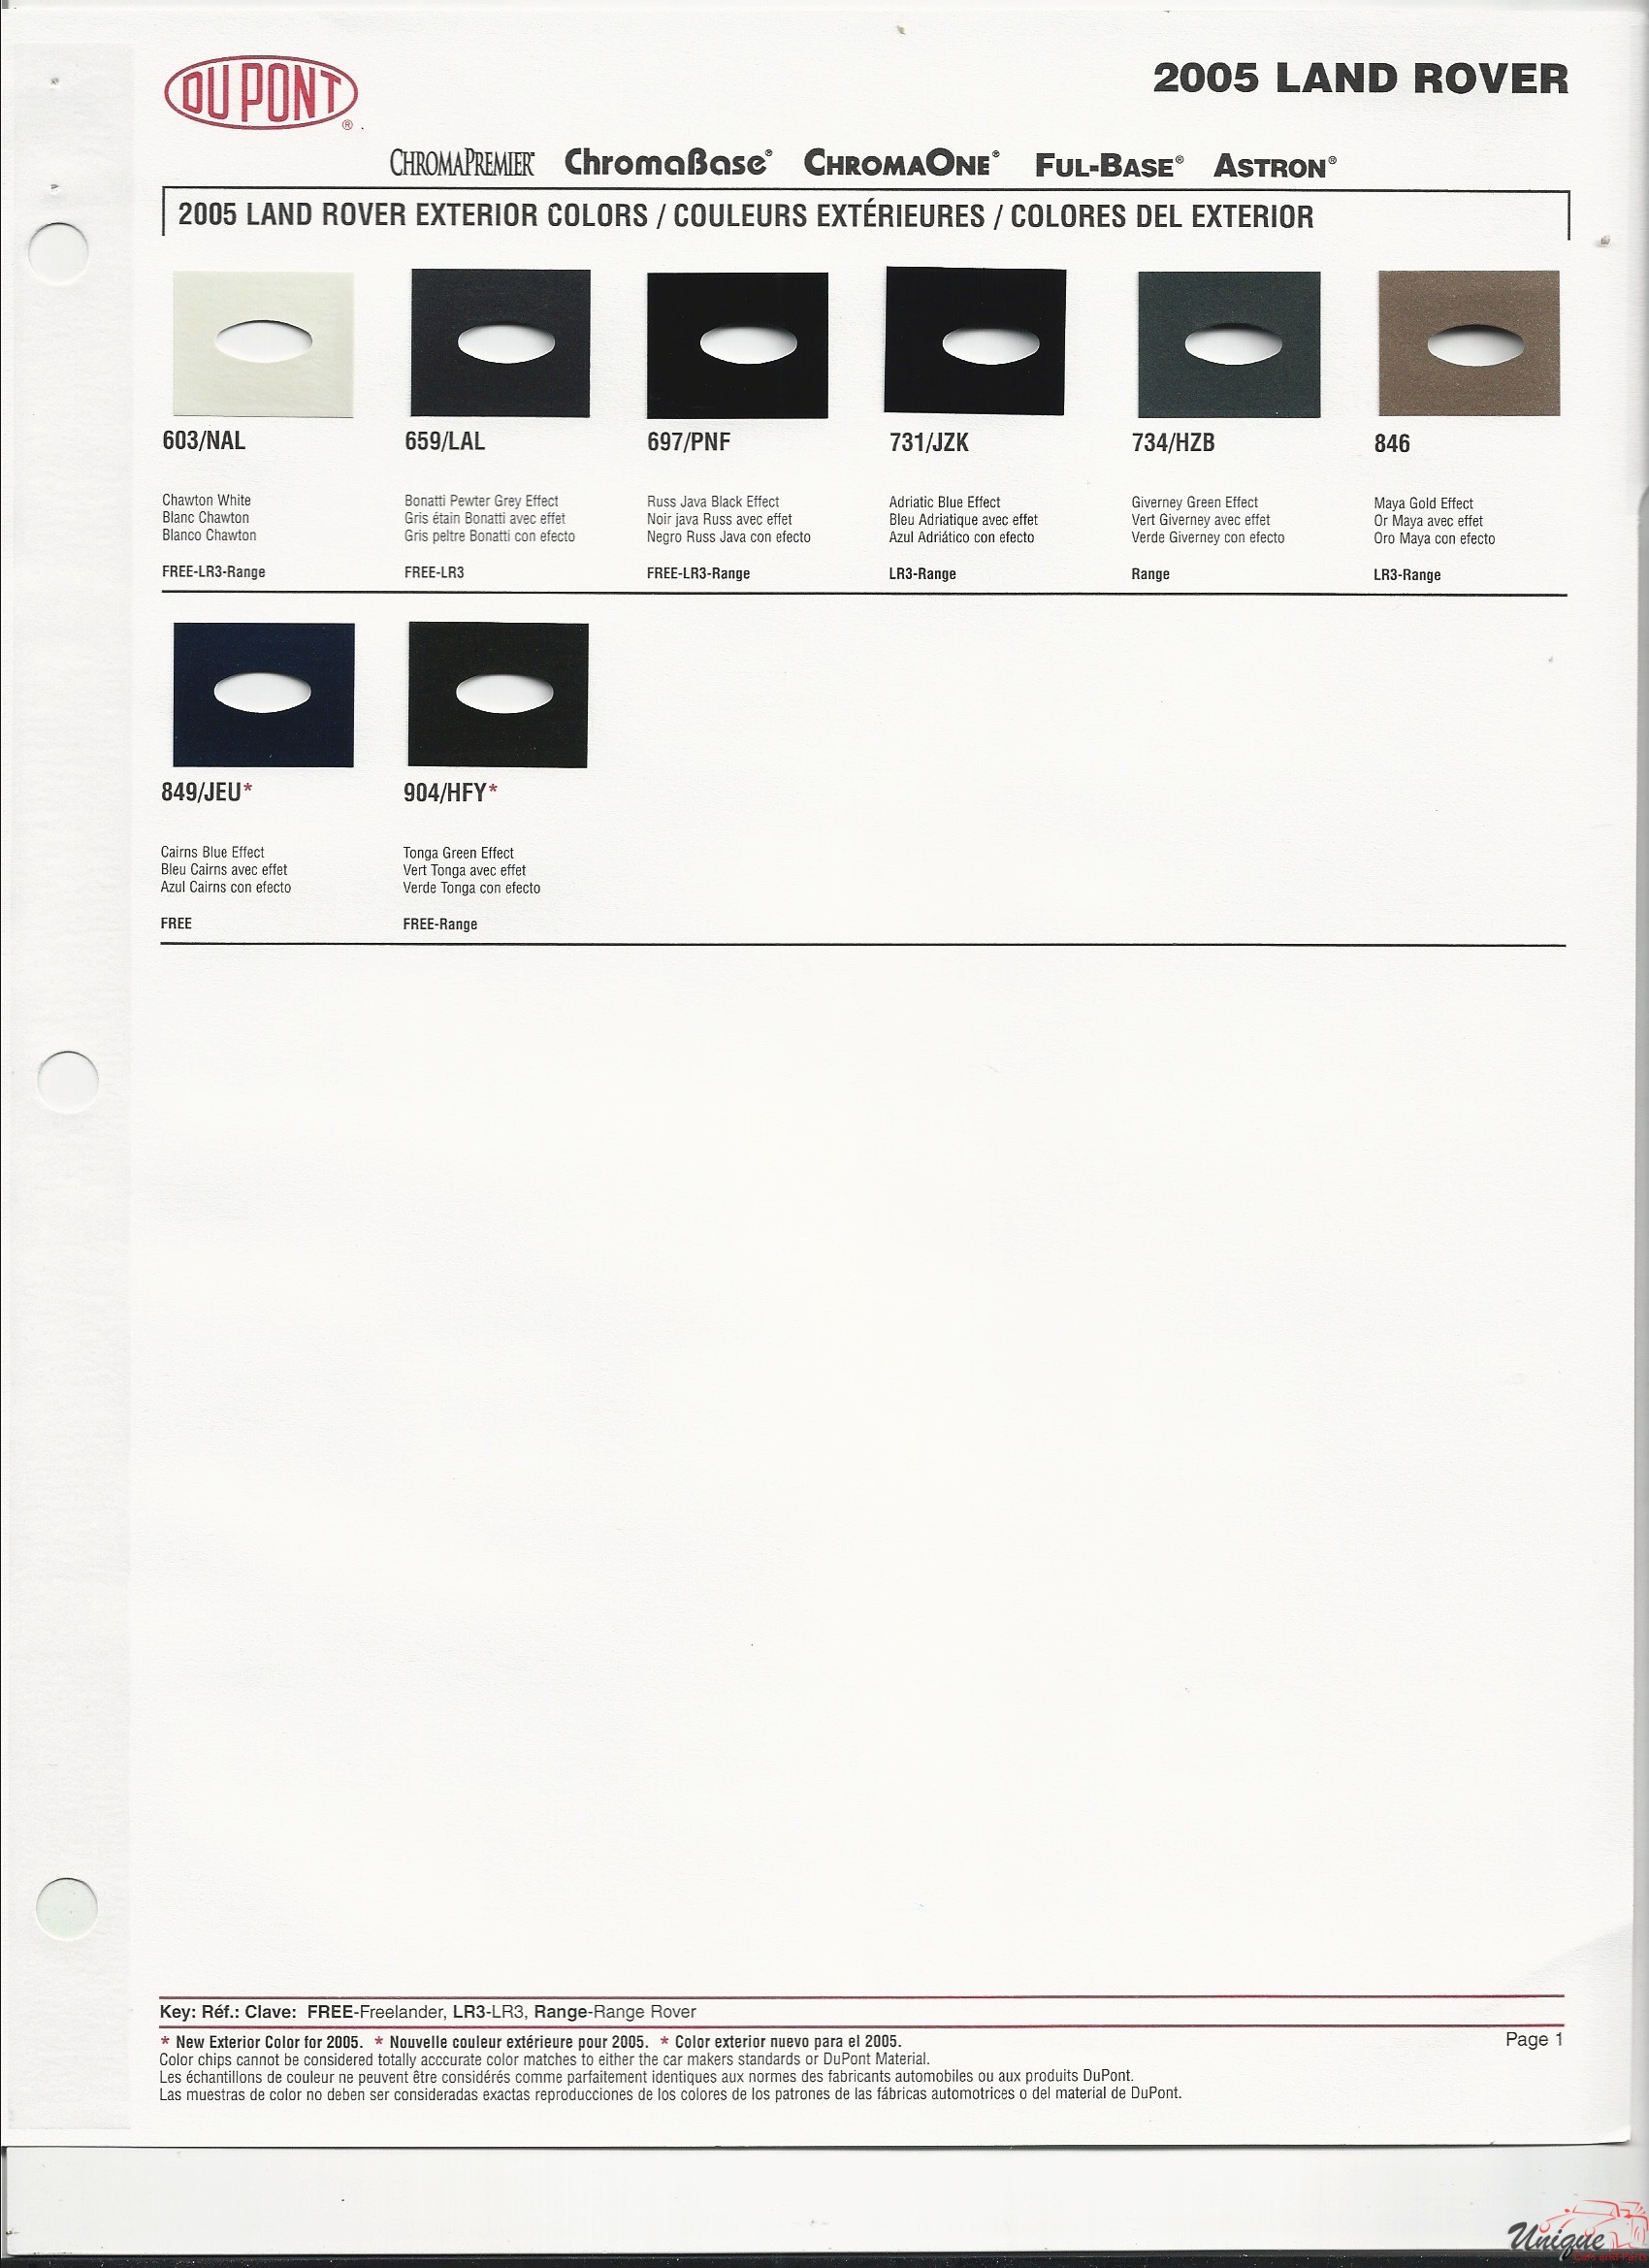 2005 Land Rover Paint Charts